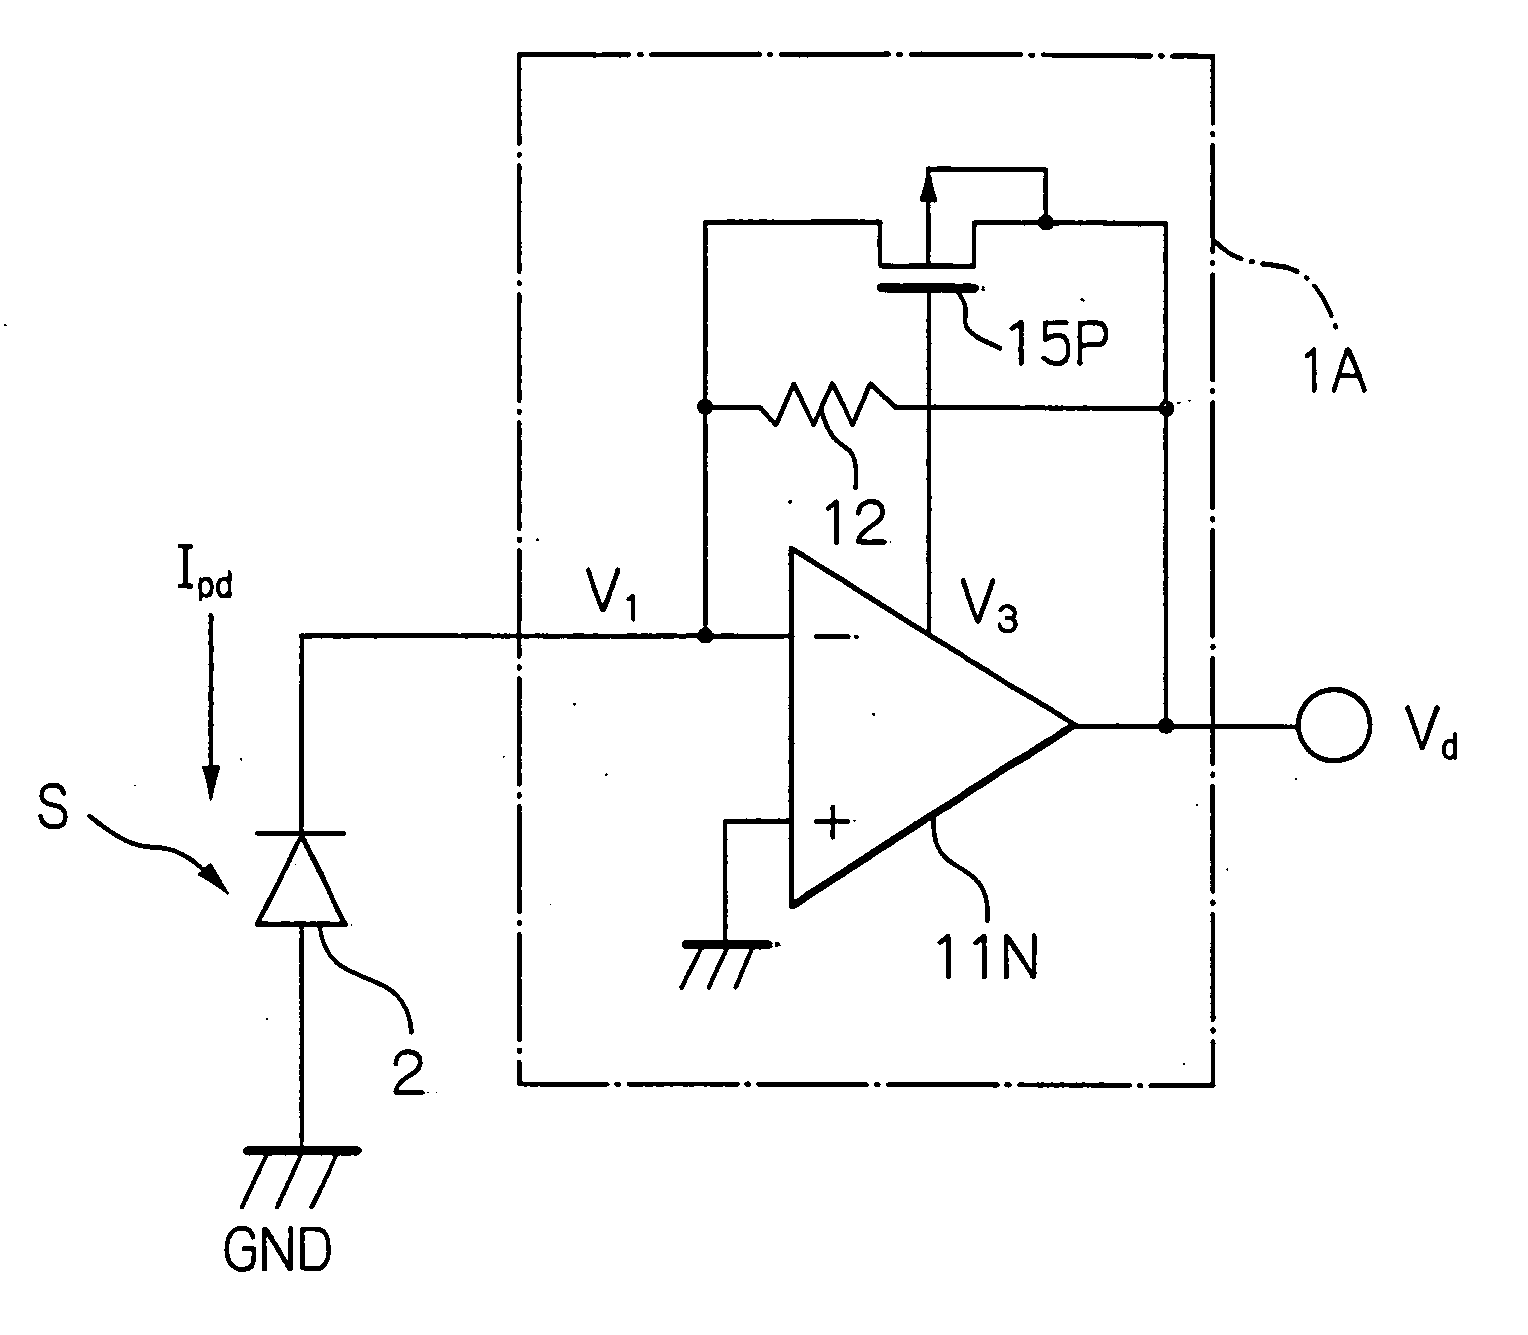 Photocurrent-to-voltage conversion apparatus including non-diode-connected clamping MOS transistor